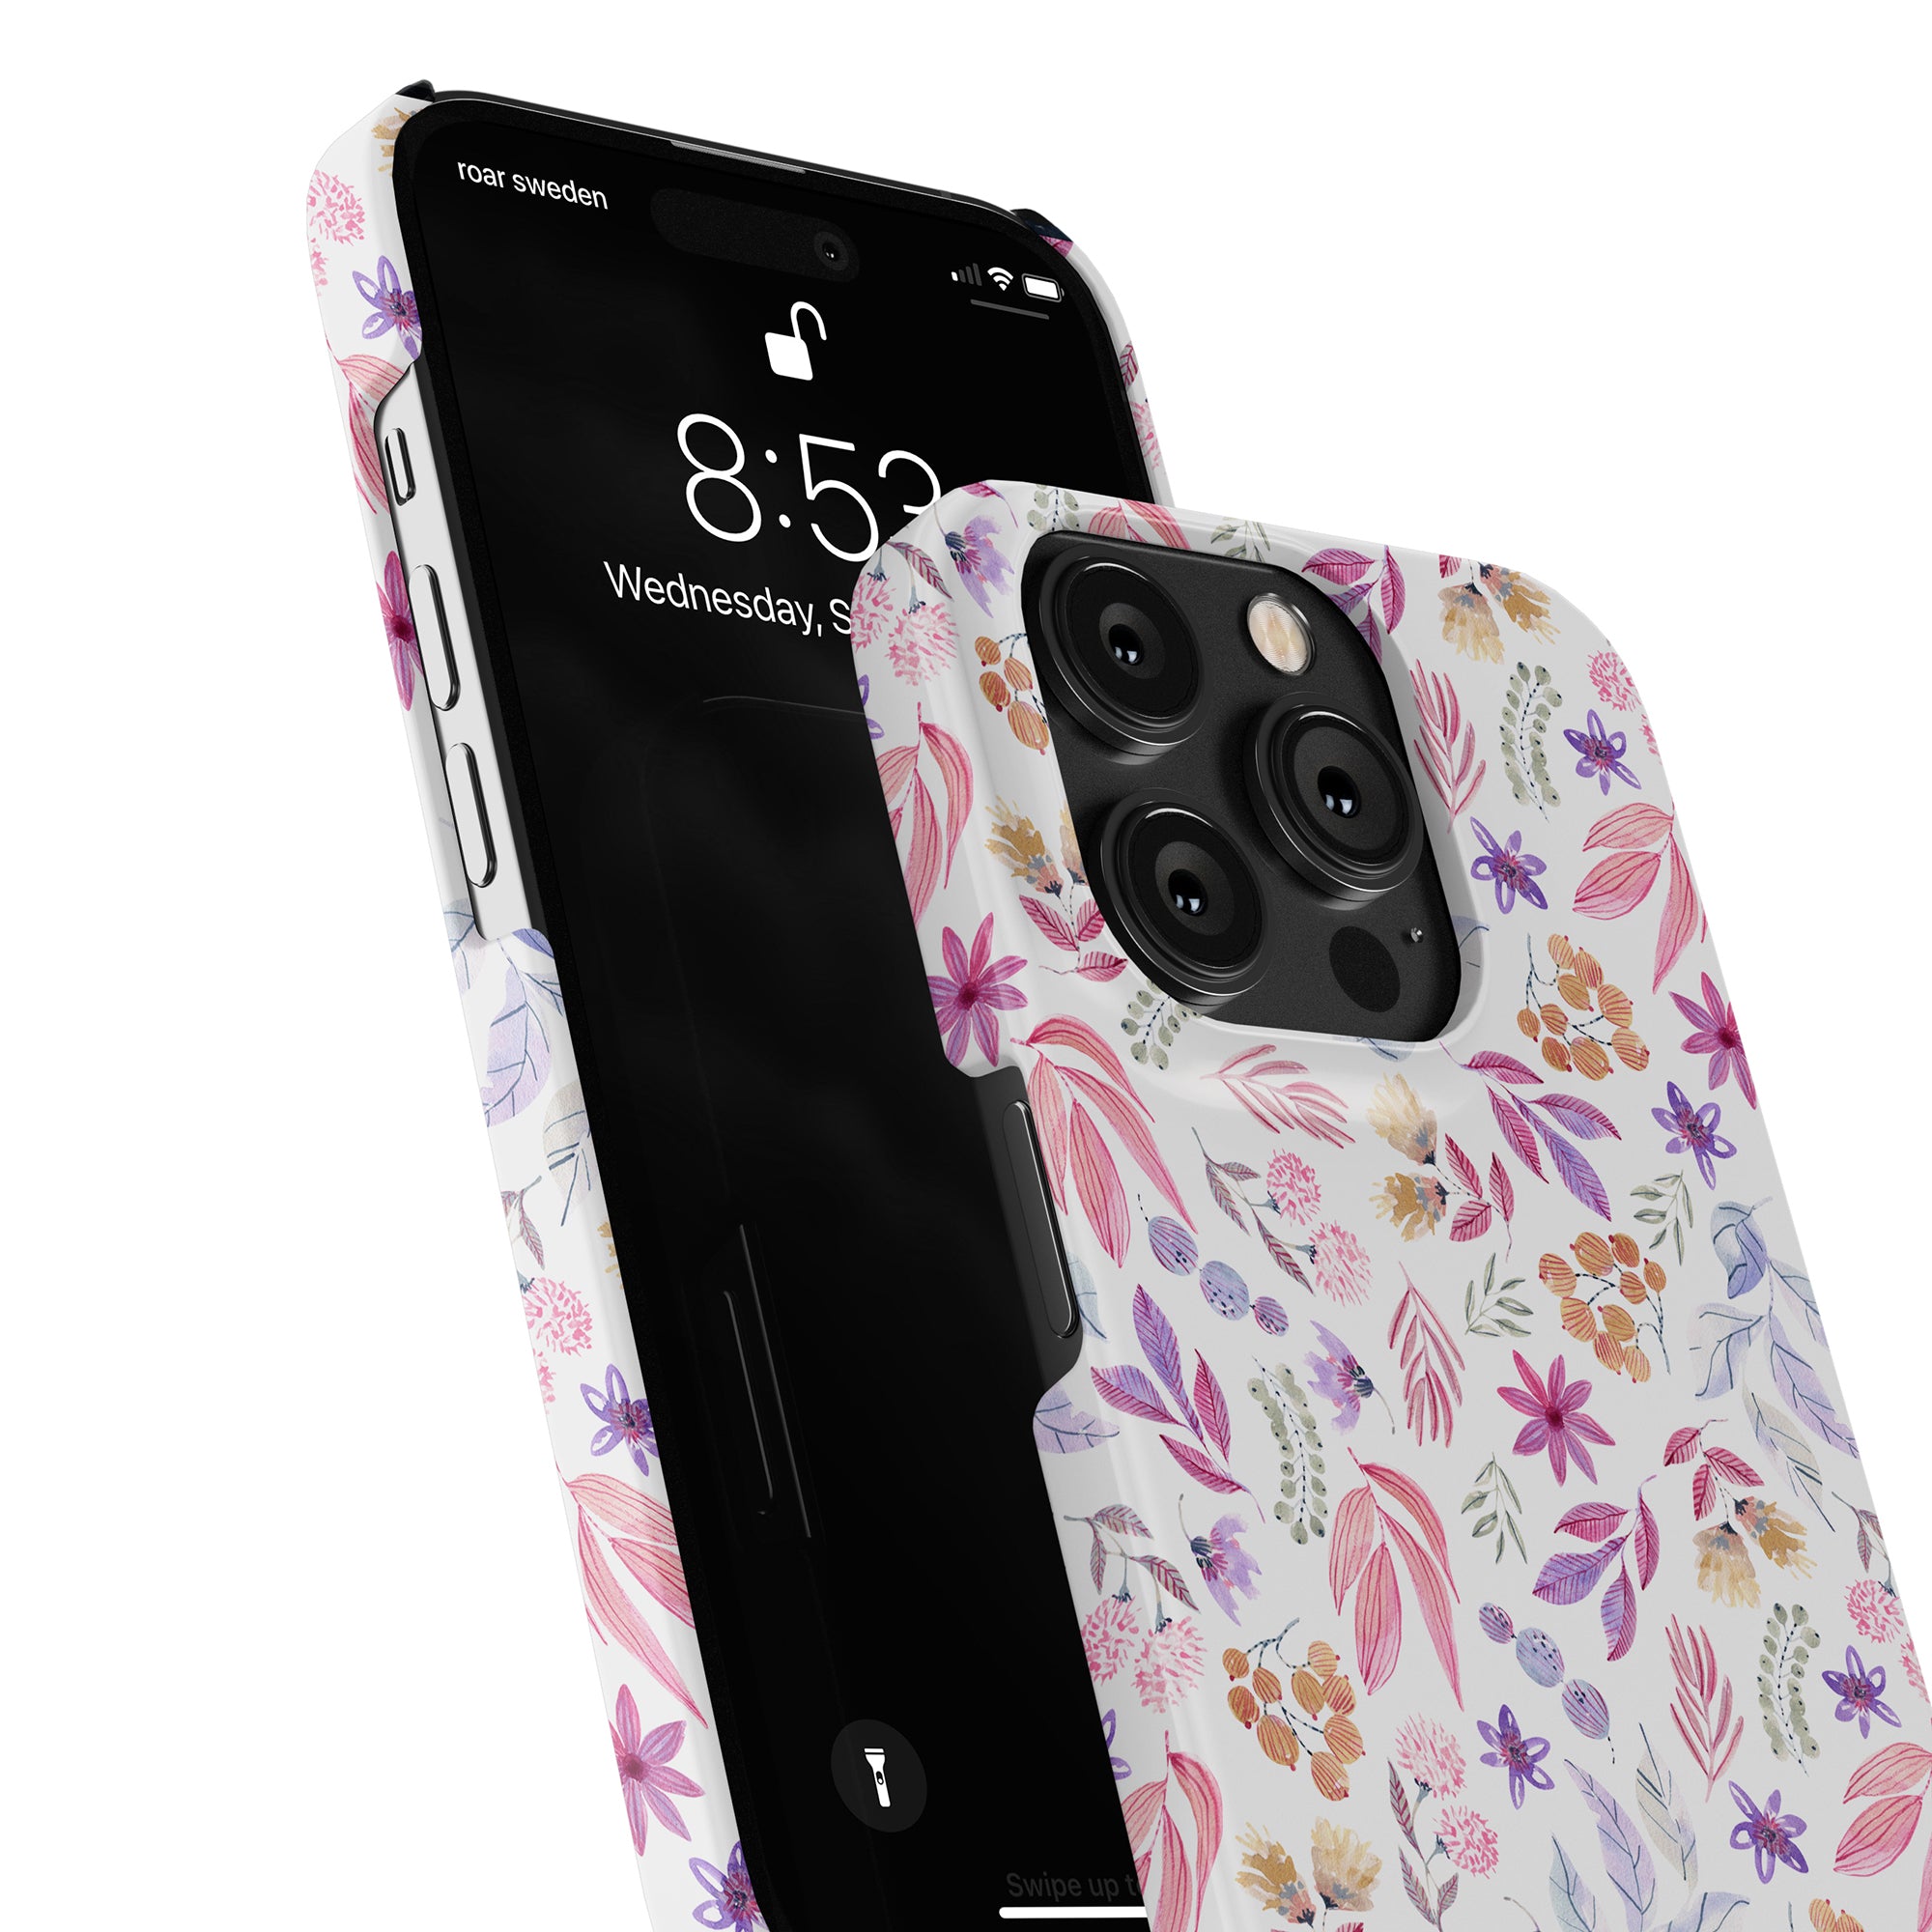 A smartphone with a Flower Power - Slim case, showing the lock screen with the date and time as 8:53. The lock screen also displays a notification and battery level indicator.